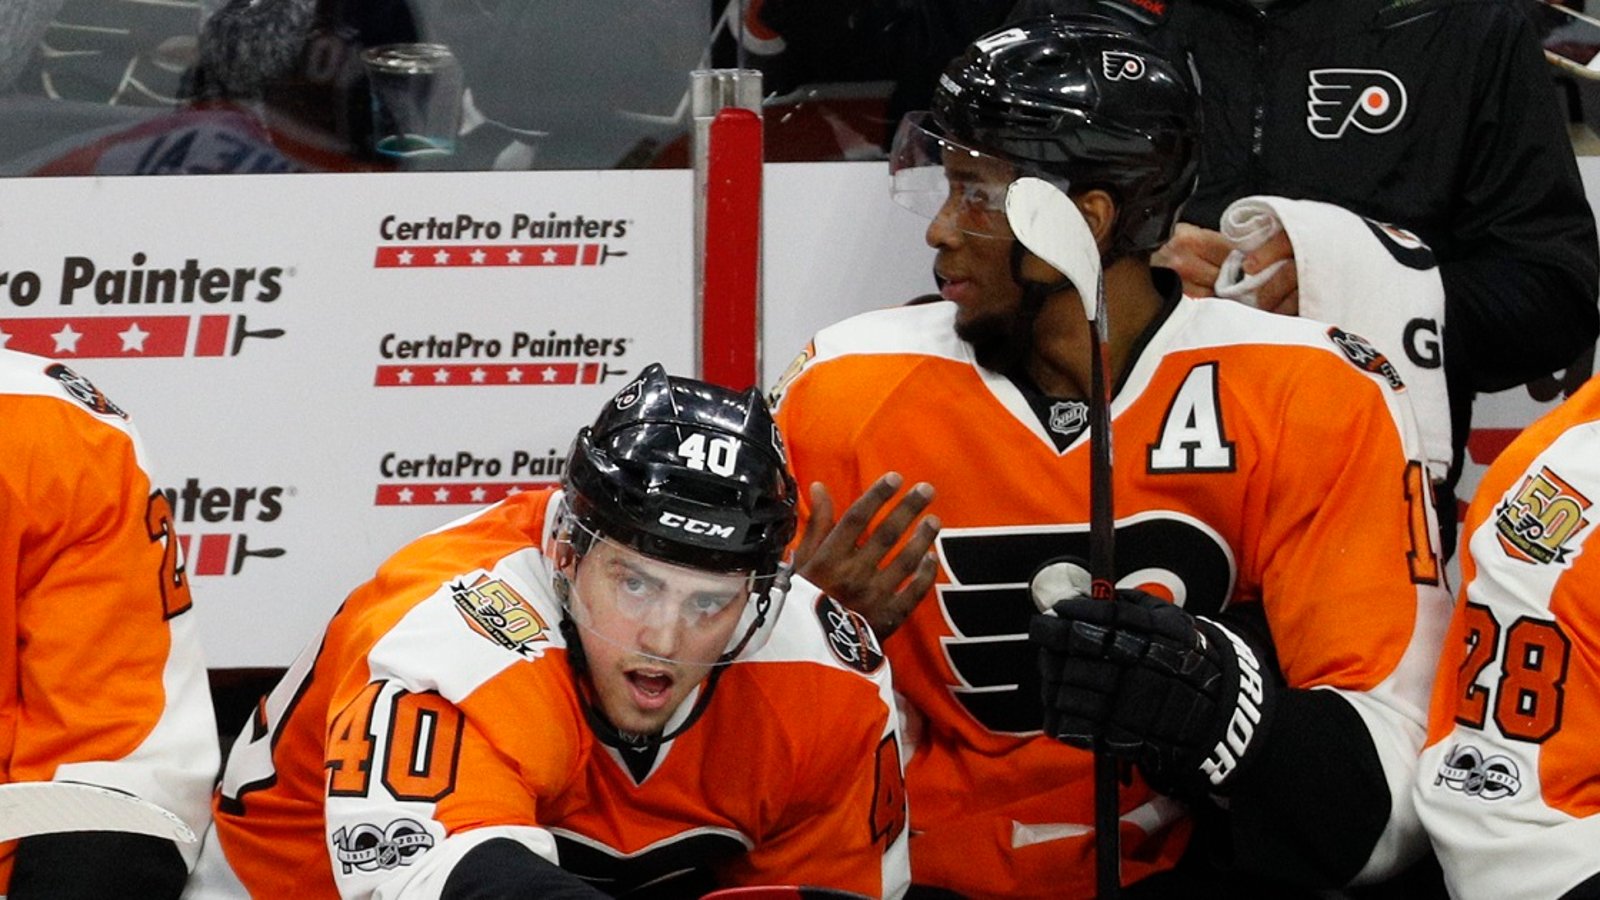 Habs, Leafs, Canucks, all trying to acquire Flyers forward.